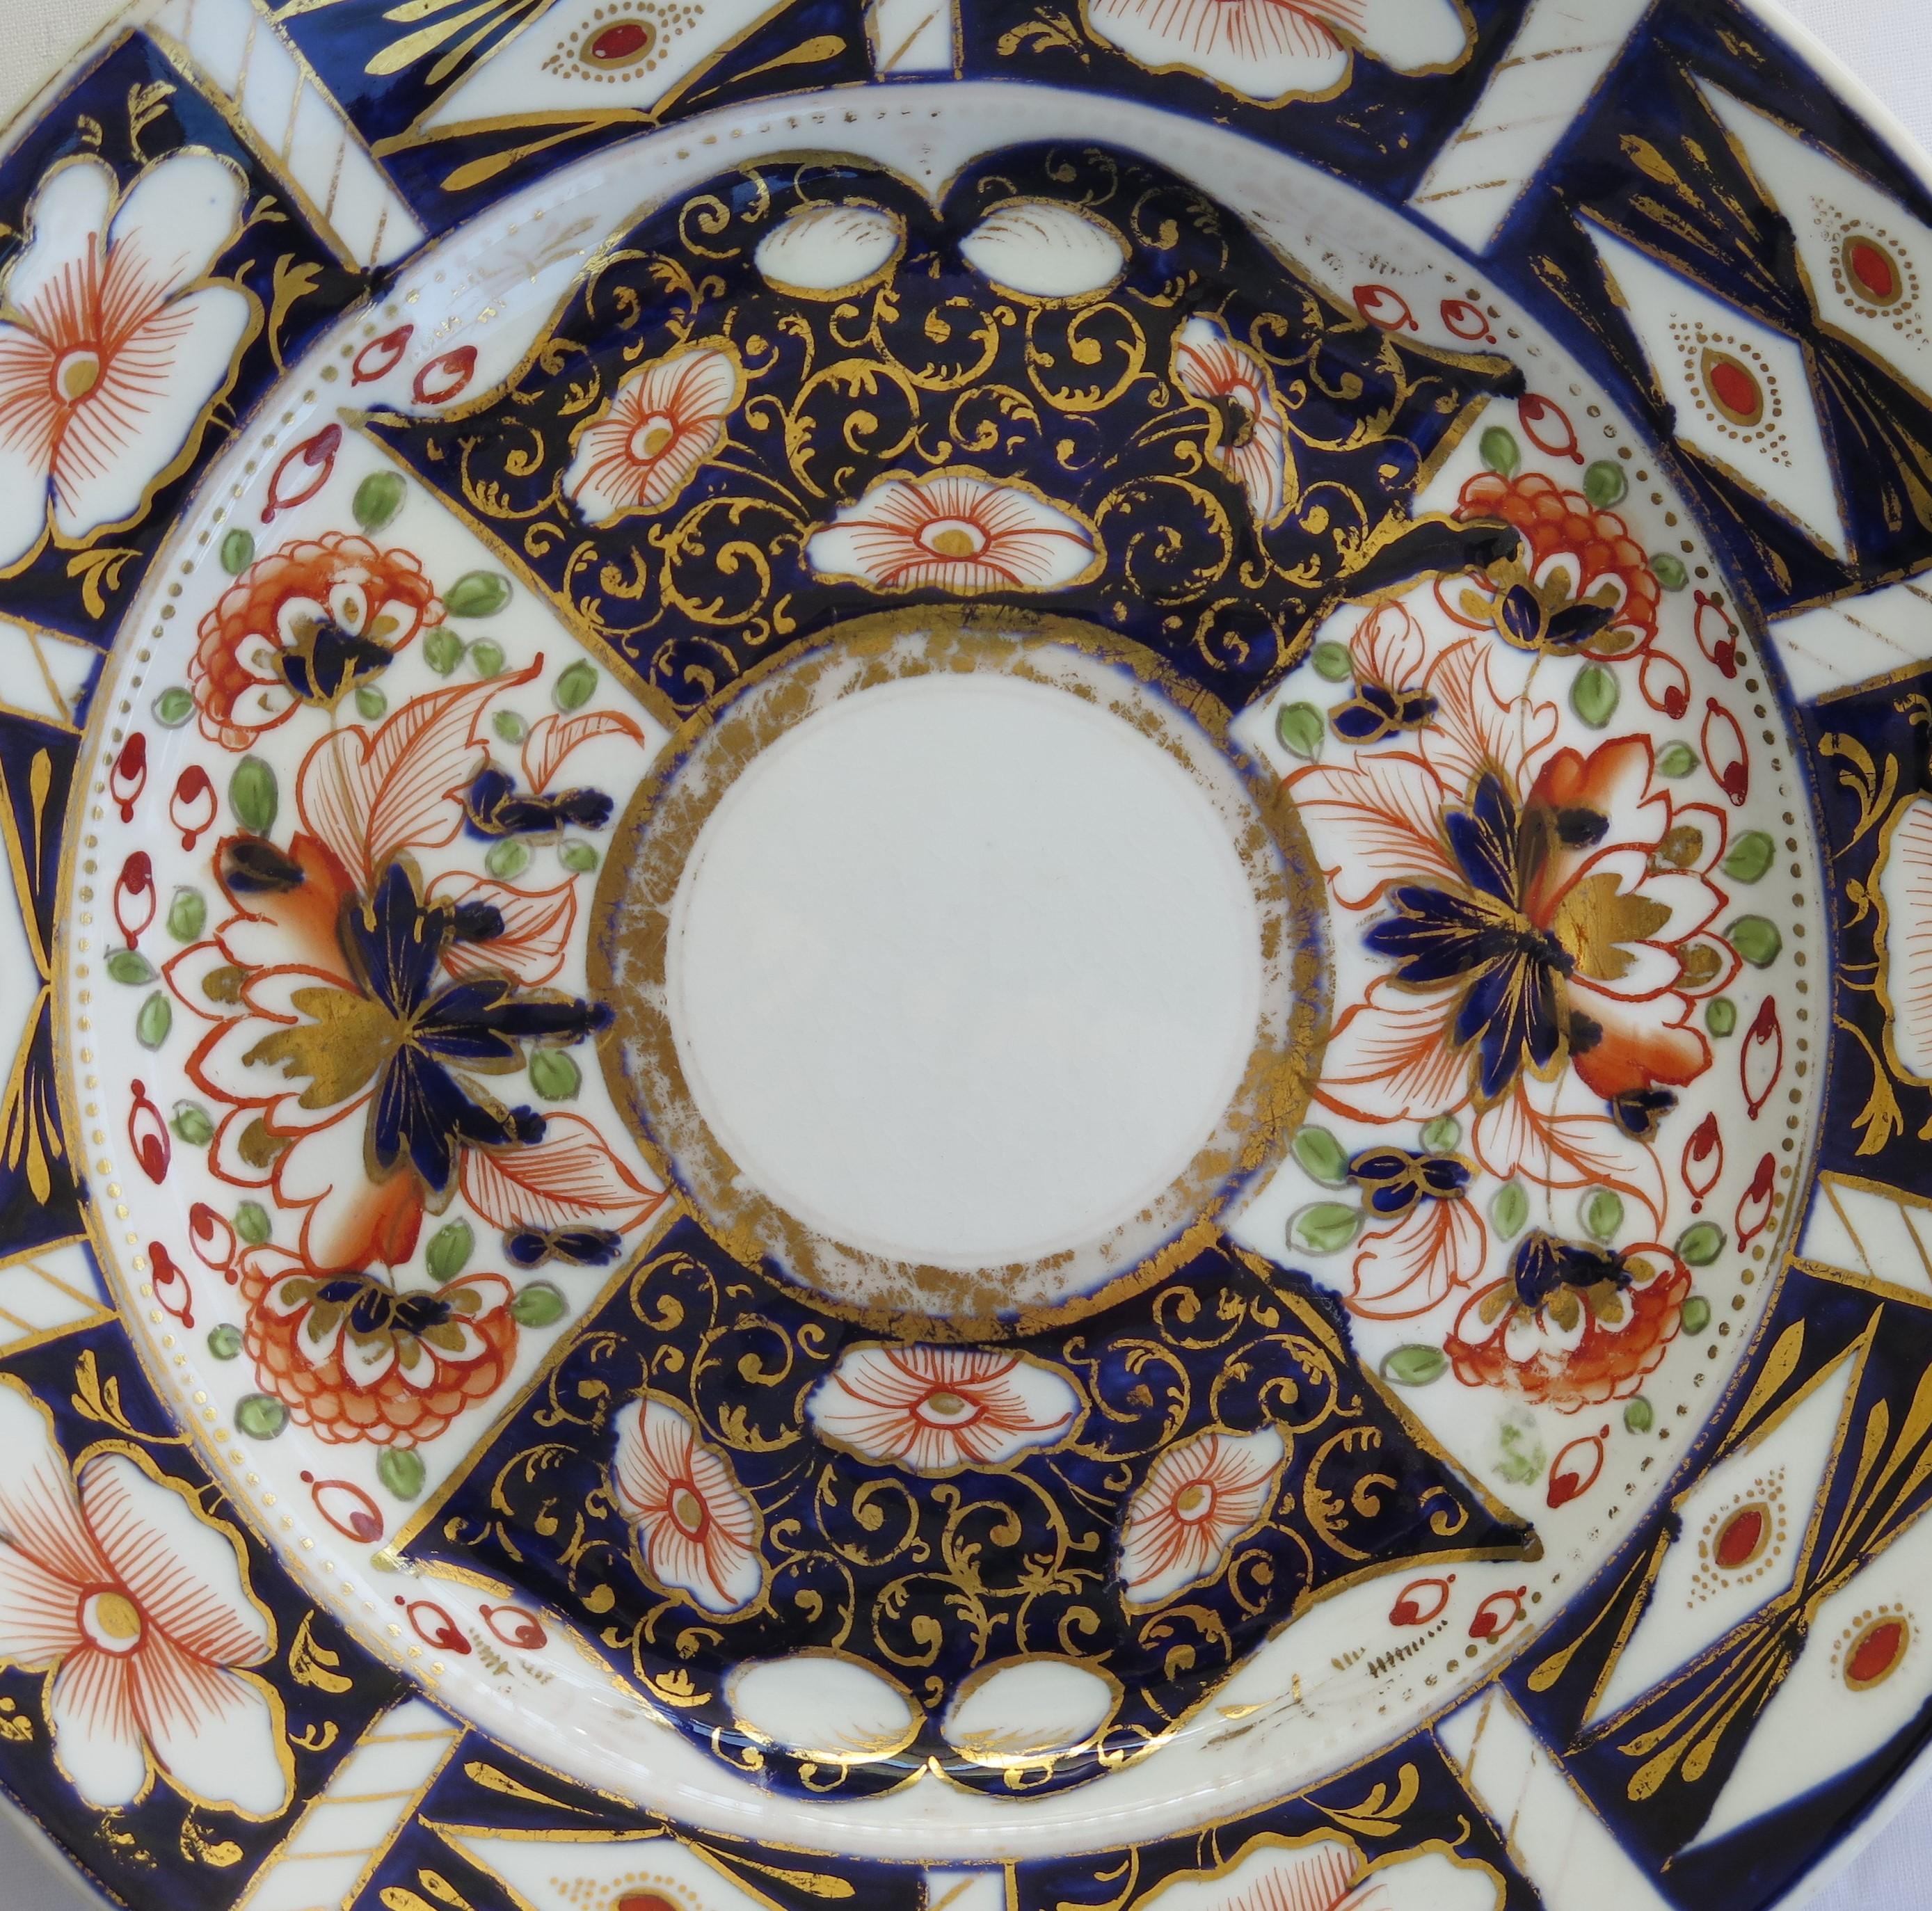 SIX Davenport Porcelain Plates Hand Painted and Gilded Pattern, Circa 1870 For Sale 3